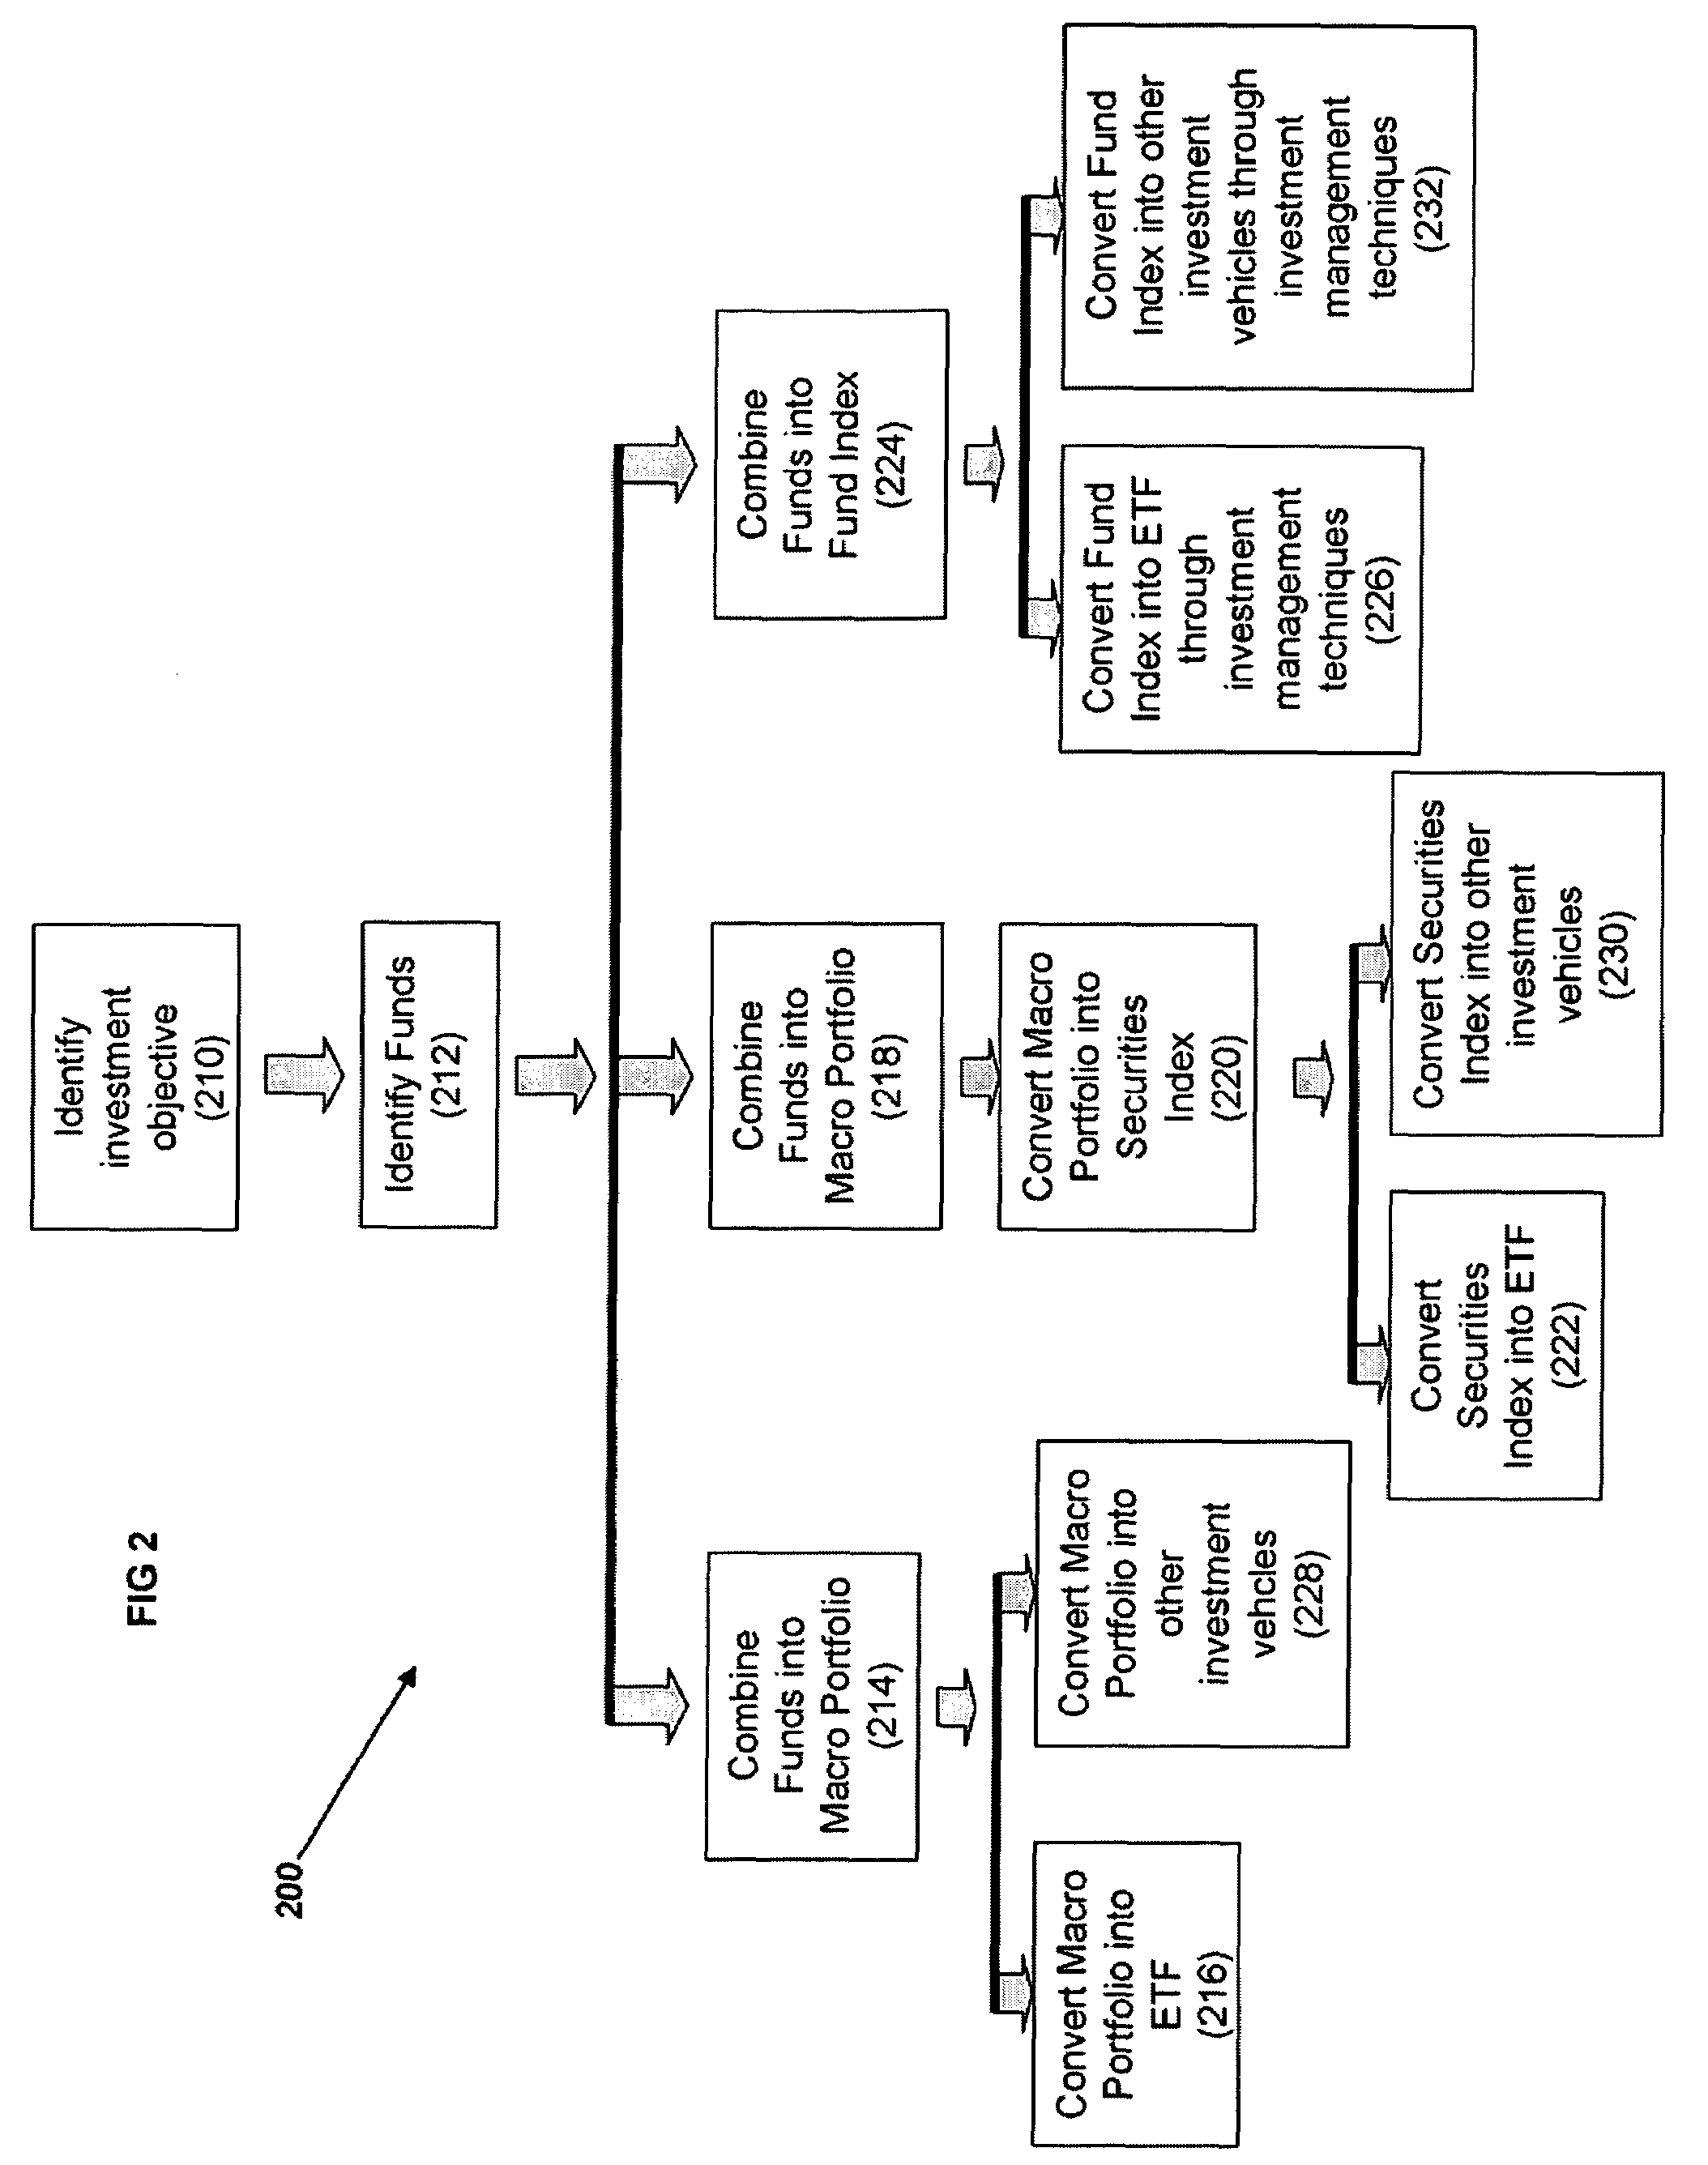 Systems and methods for constructing exchange traded funds and other investment vehicles